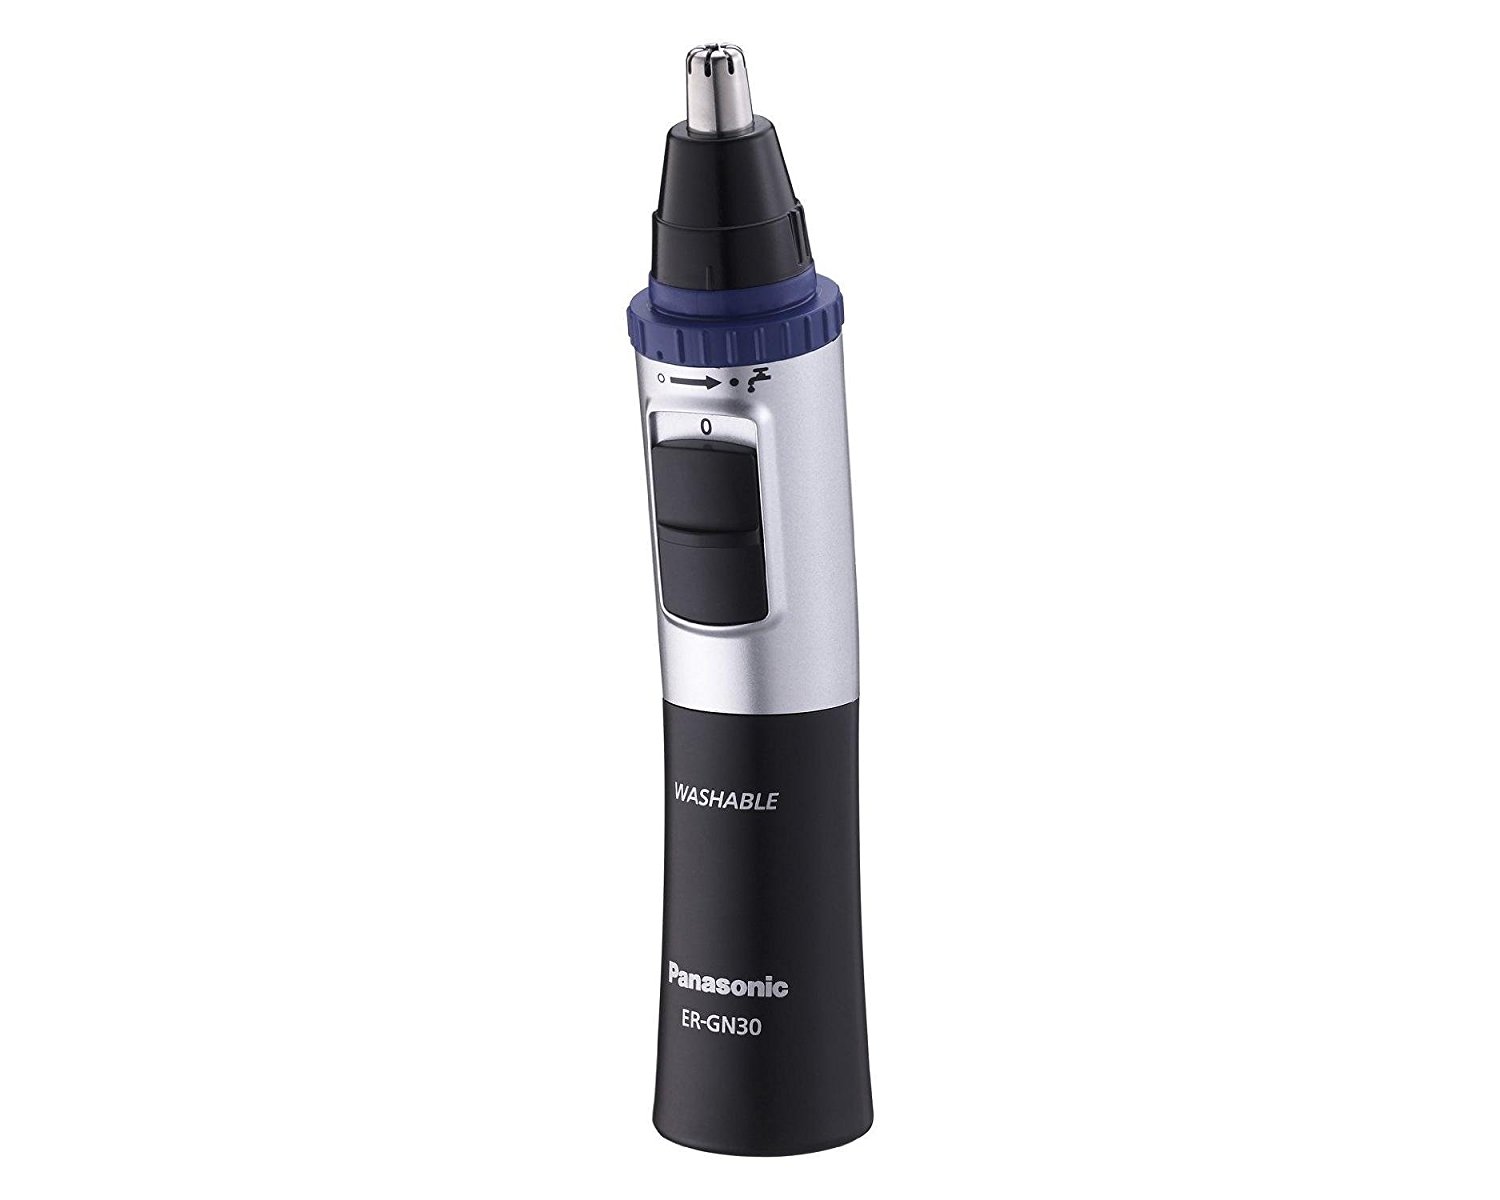 best nose and ear hair trimmer 2020